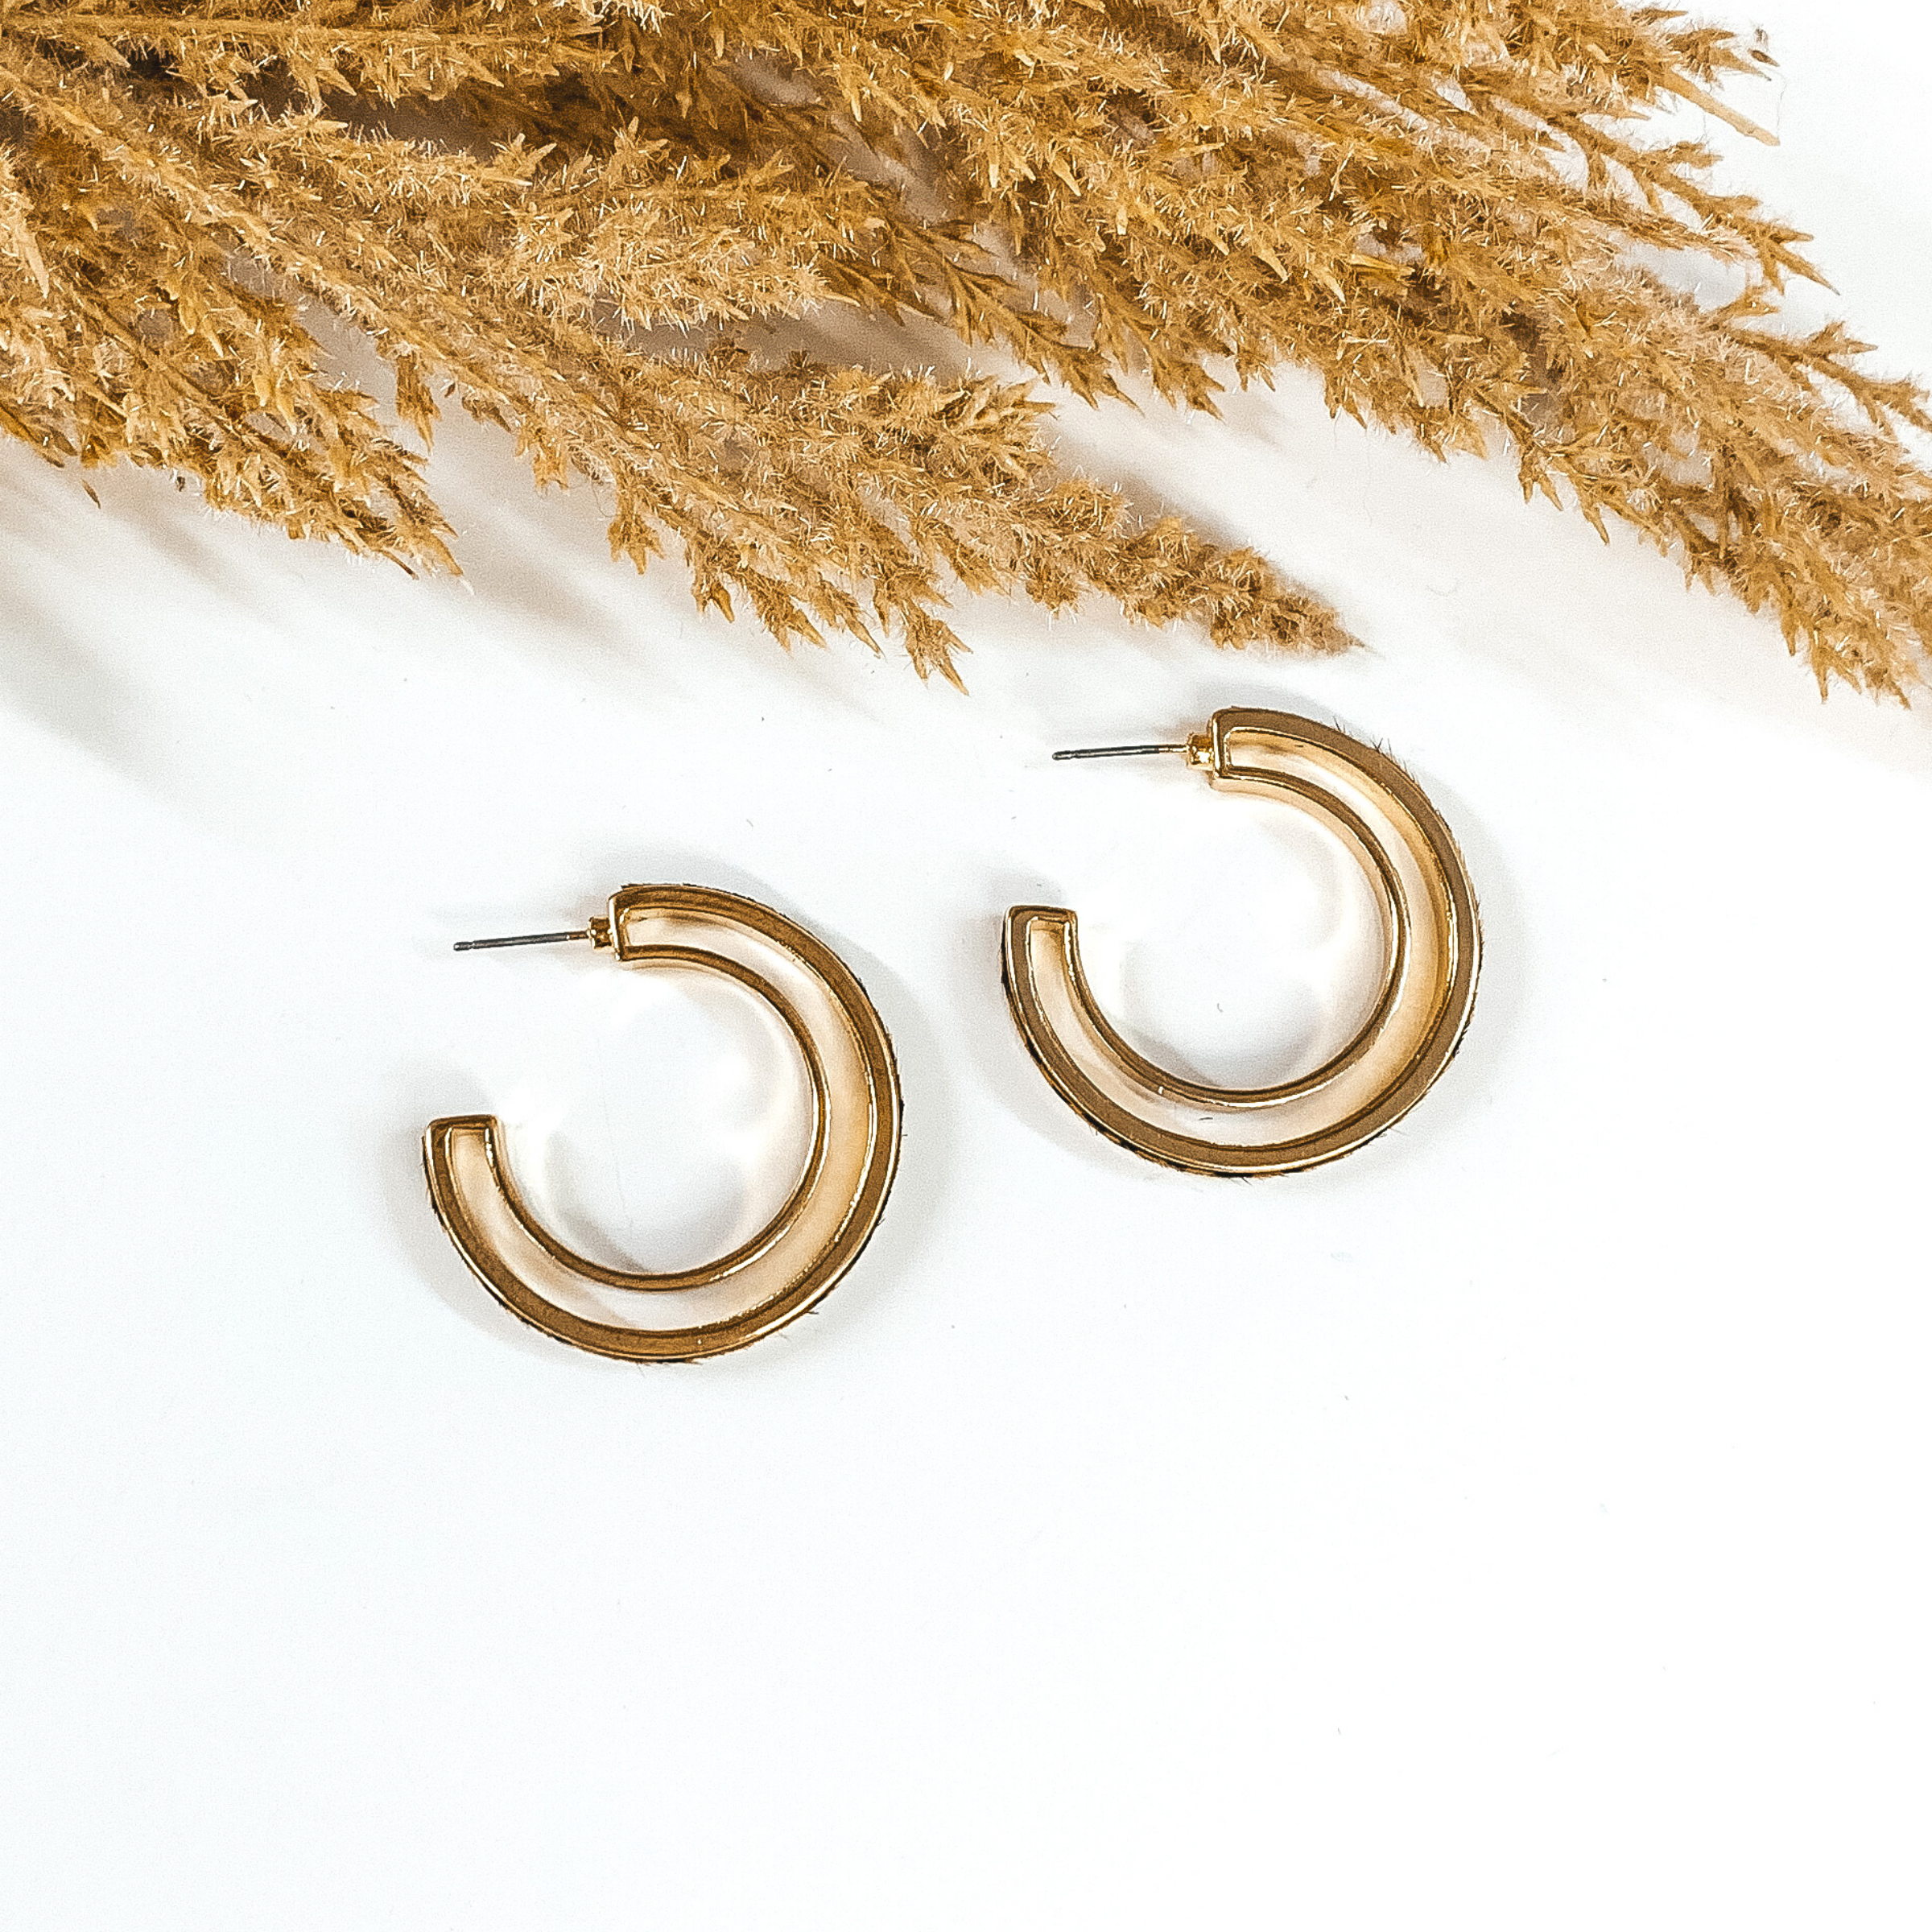 Gold Double Circle Hoop Earrings with White Dotted Print Inlay - Giddy Up Glamour Boutique